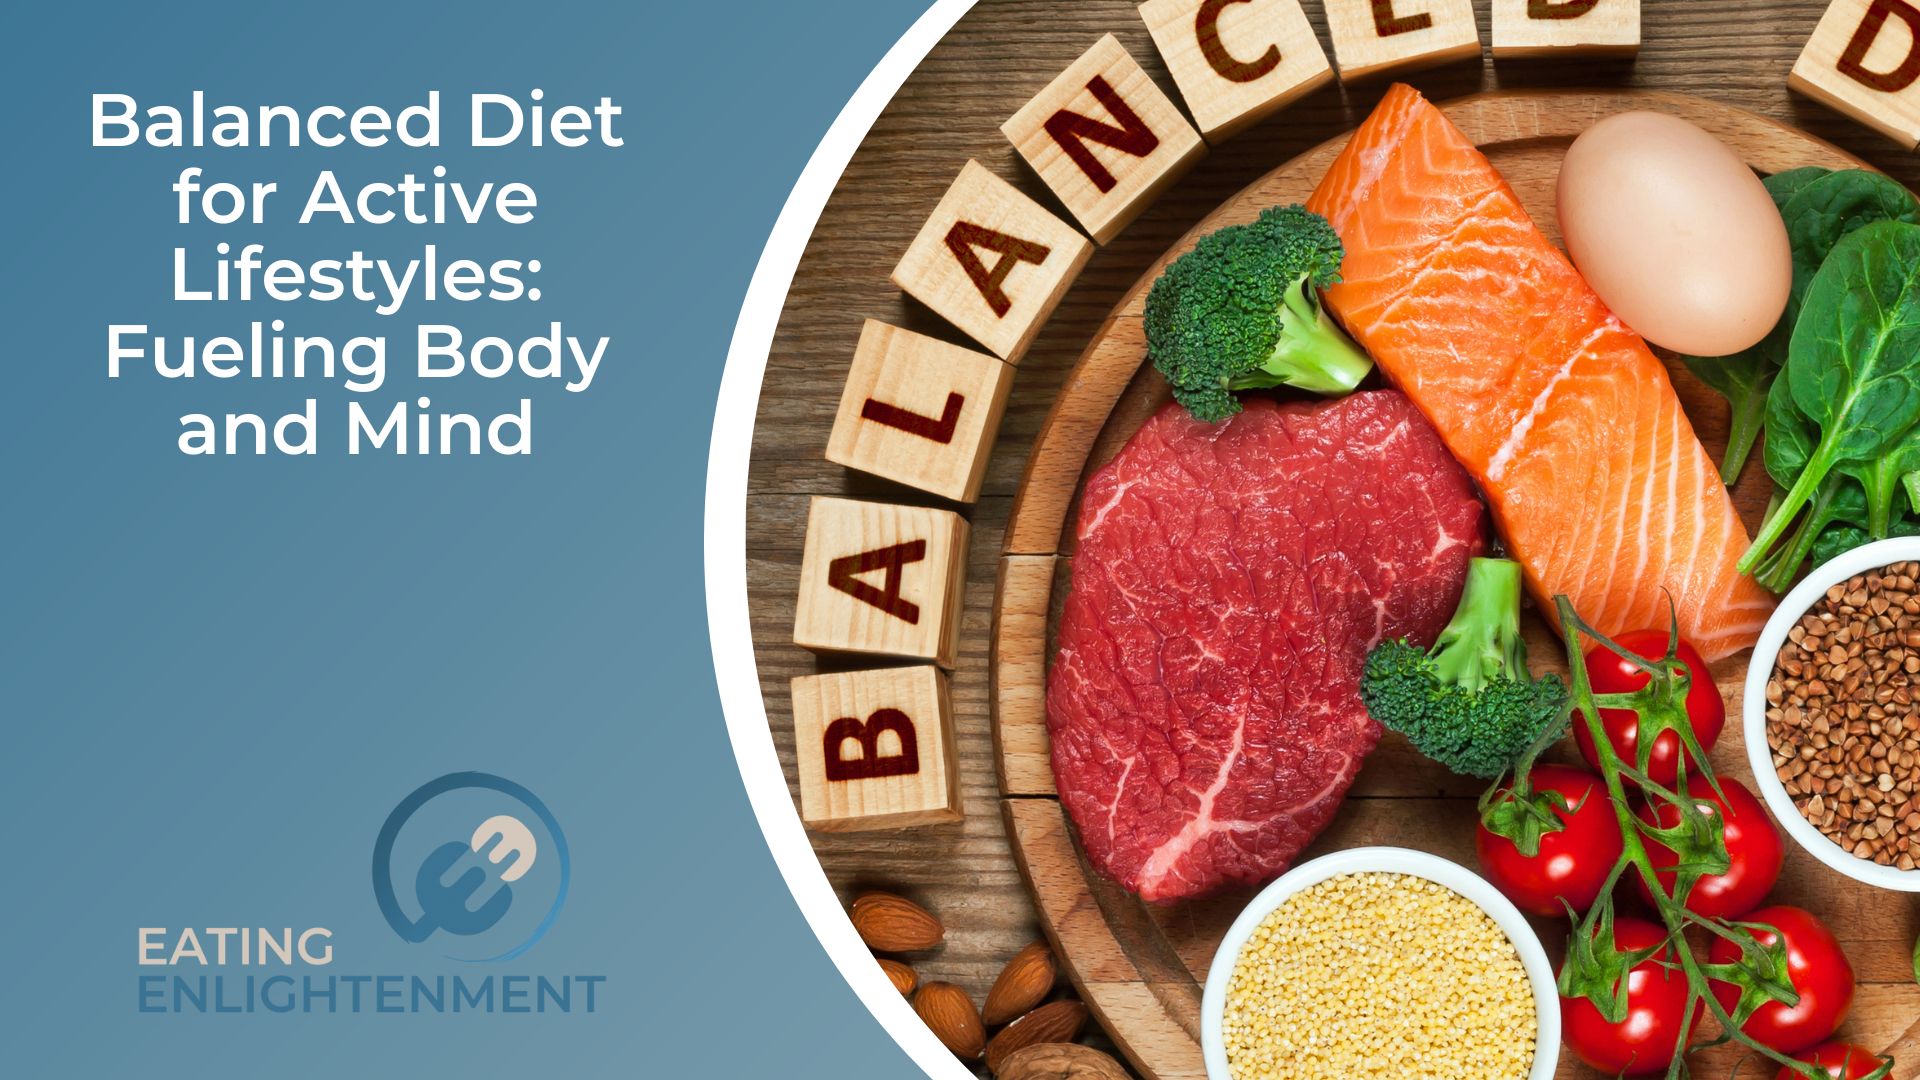 Balanced Diet for Active Lifestyles Fueling Body and Mind